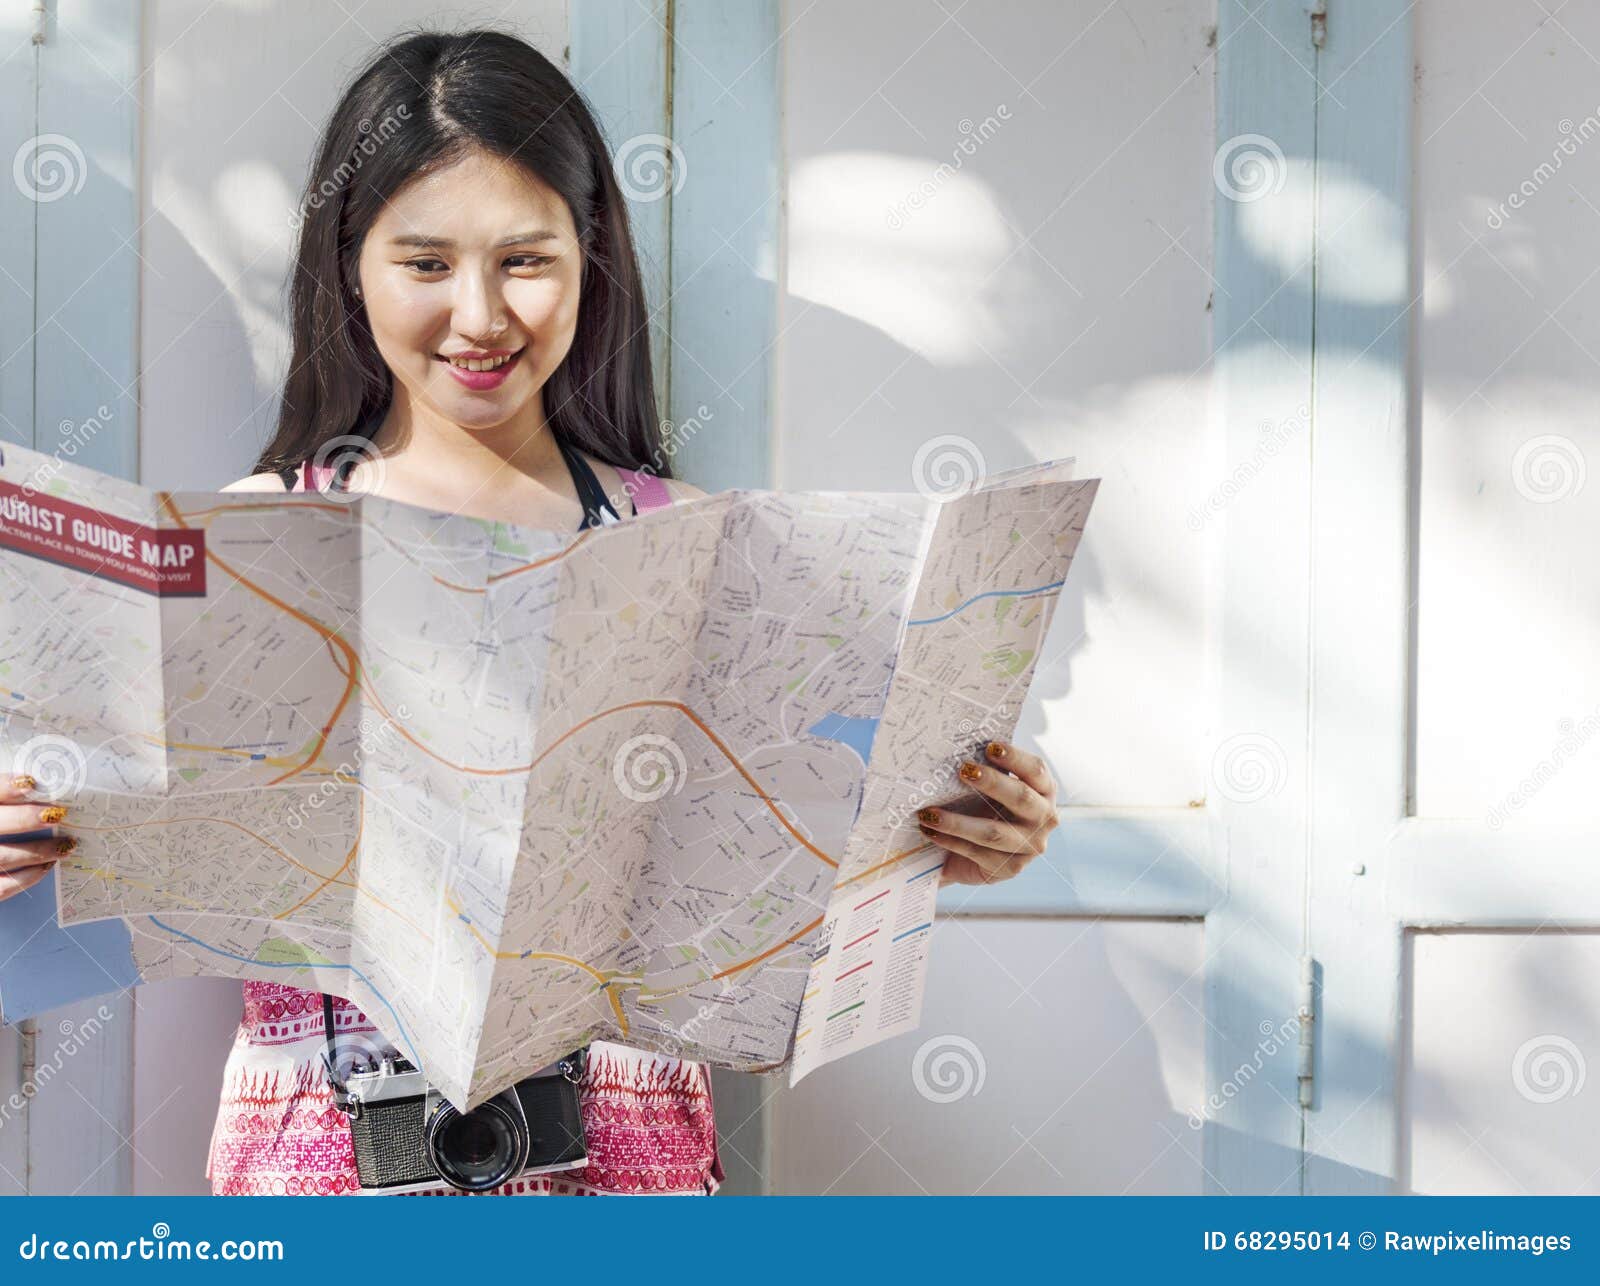 girl friendship hangout traveling holiday map concept